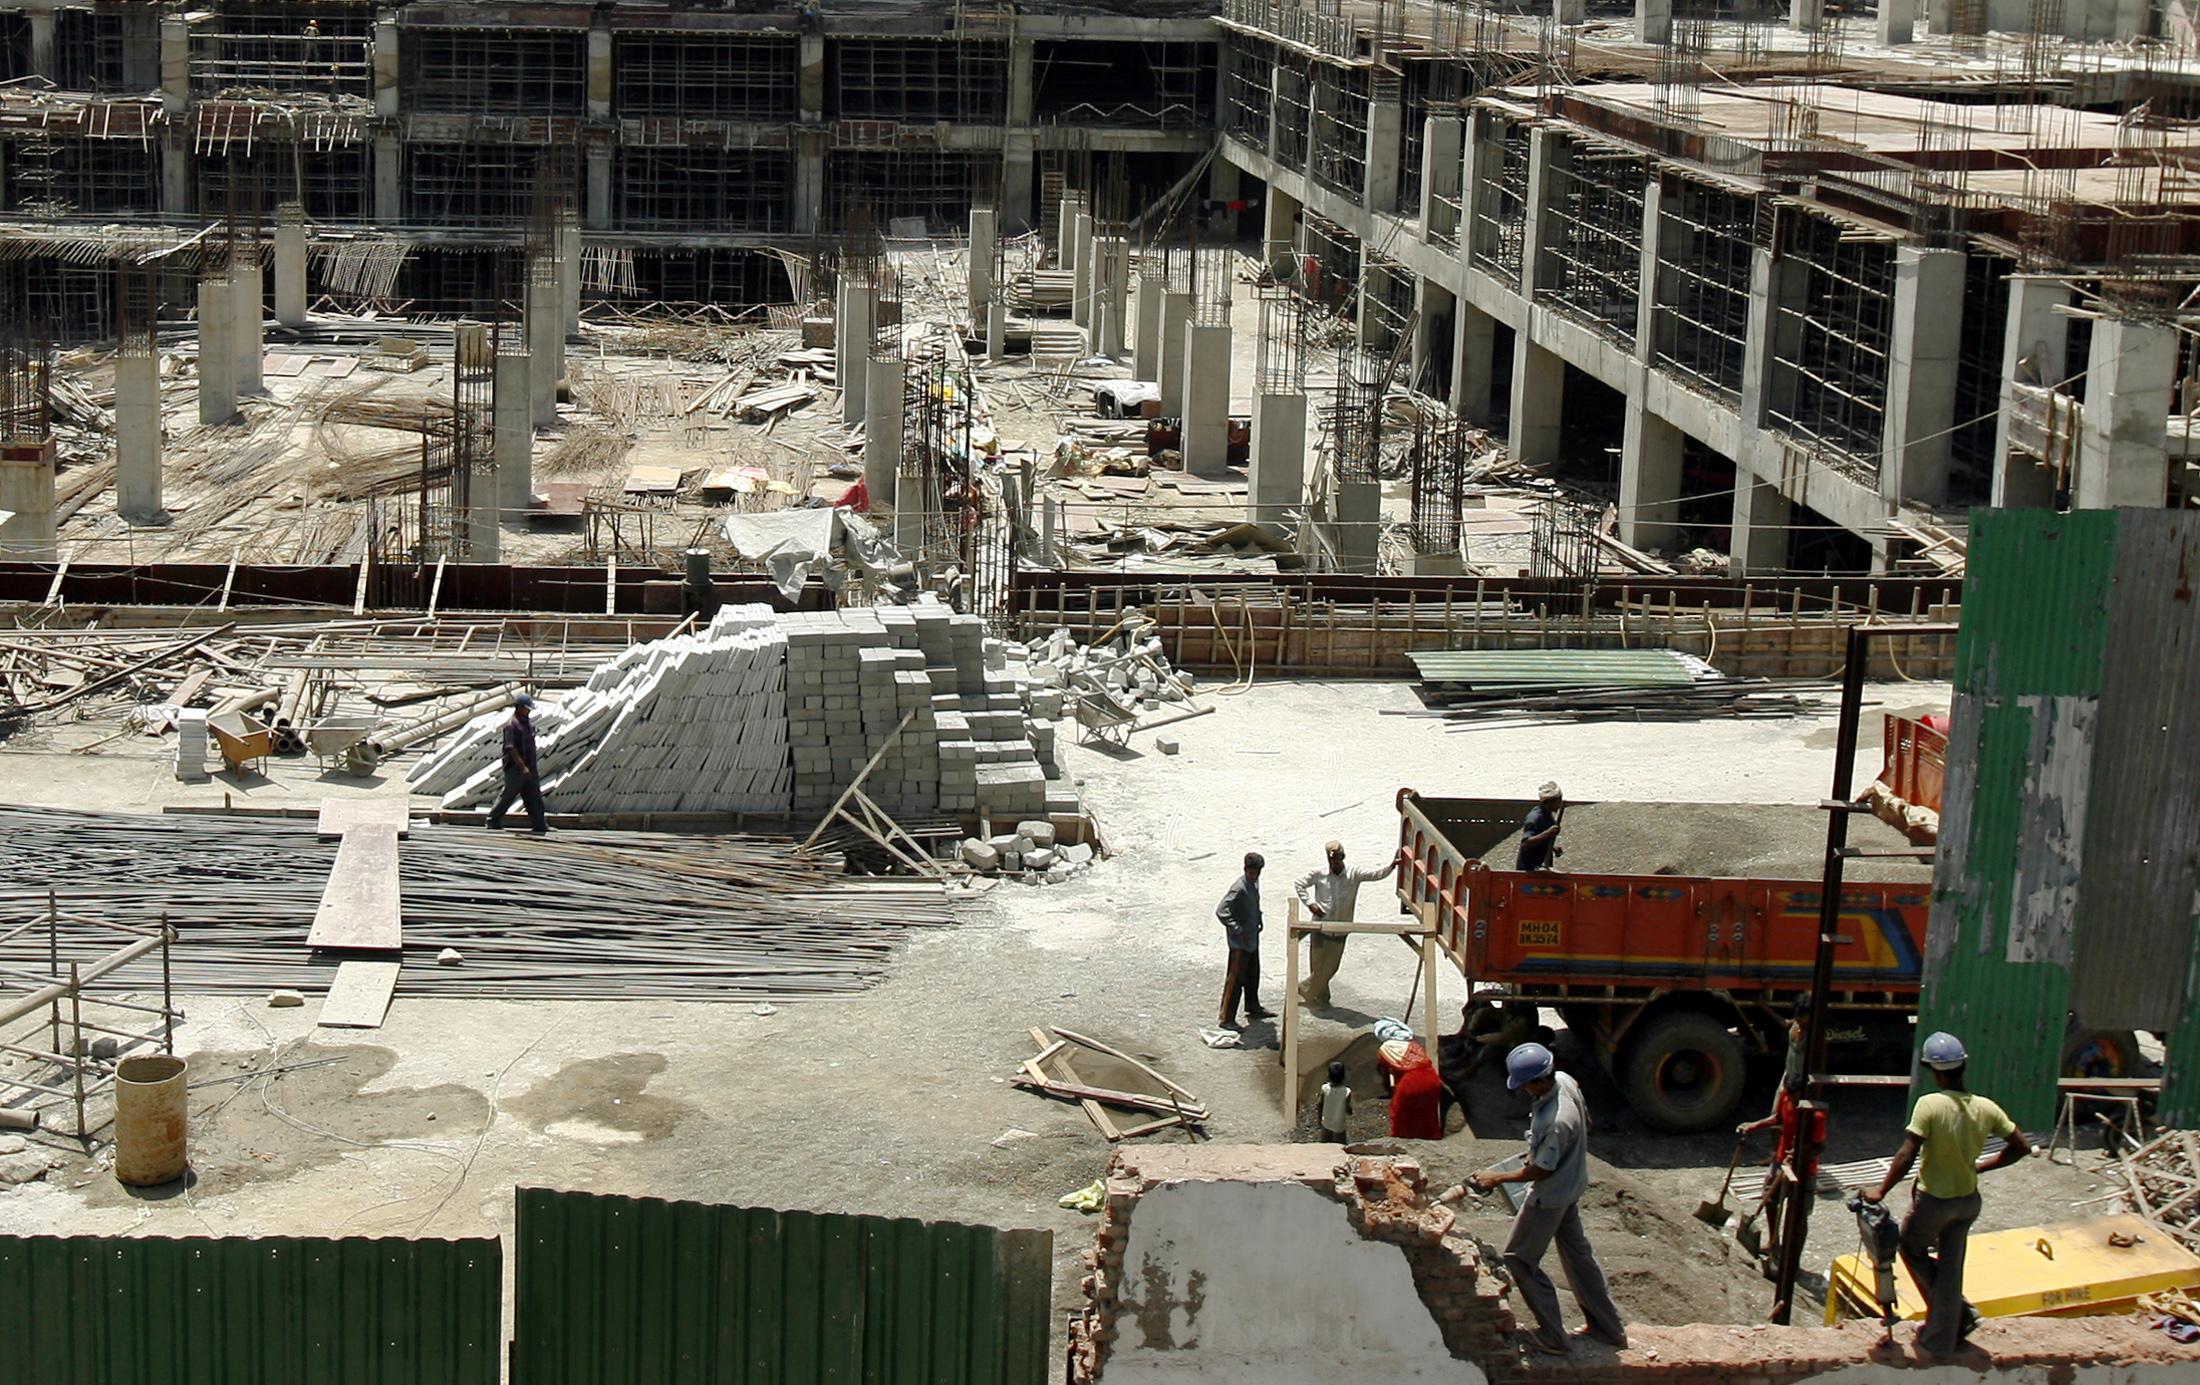 Labourers work at the construction site of a building in Mumbai